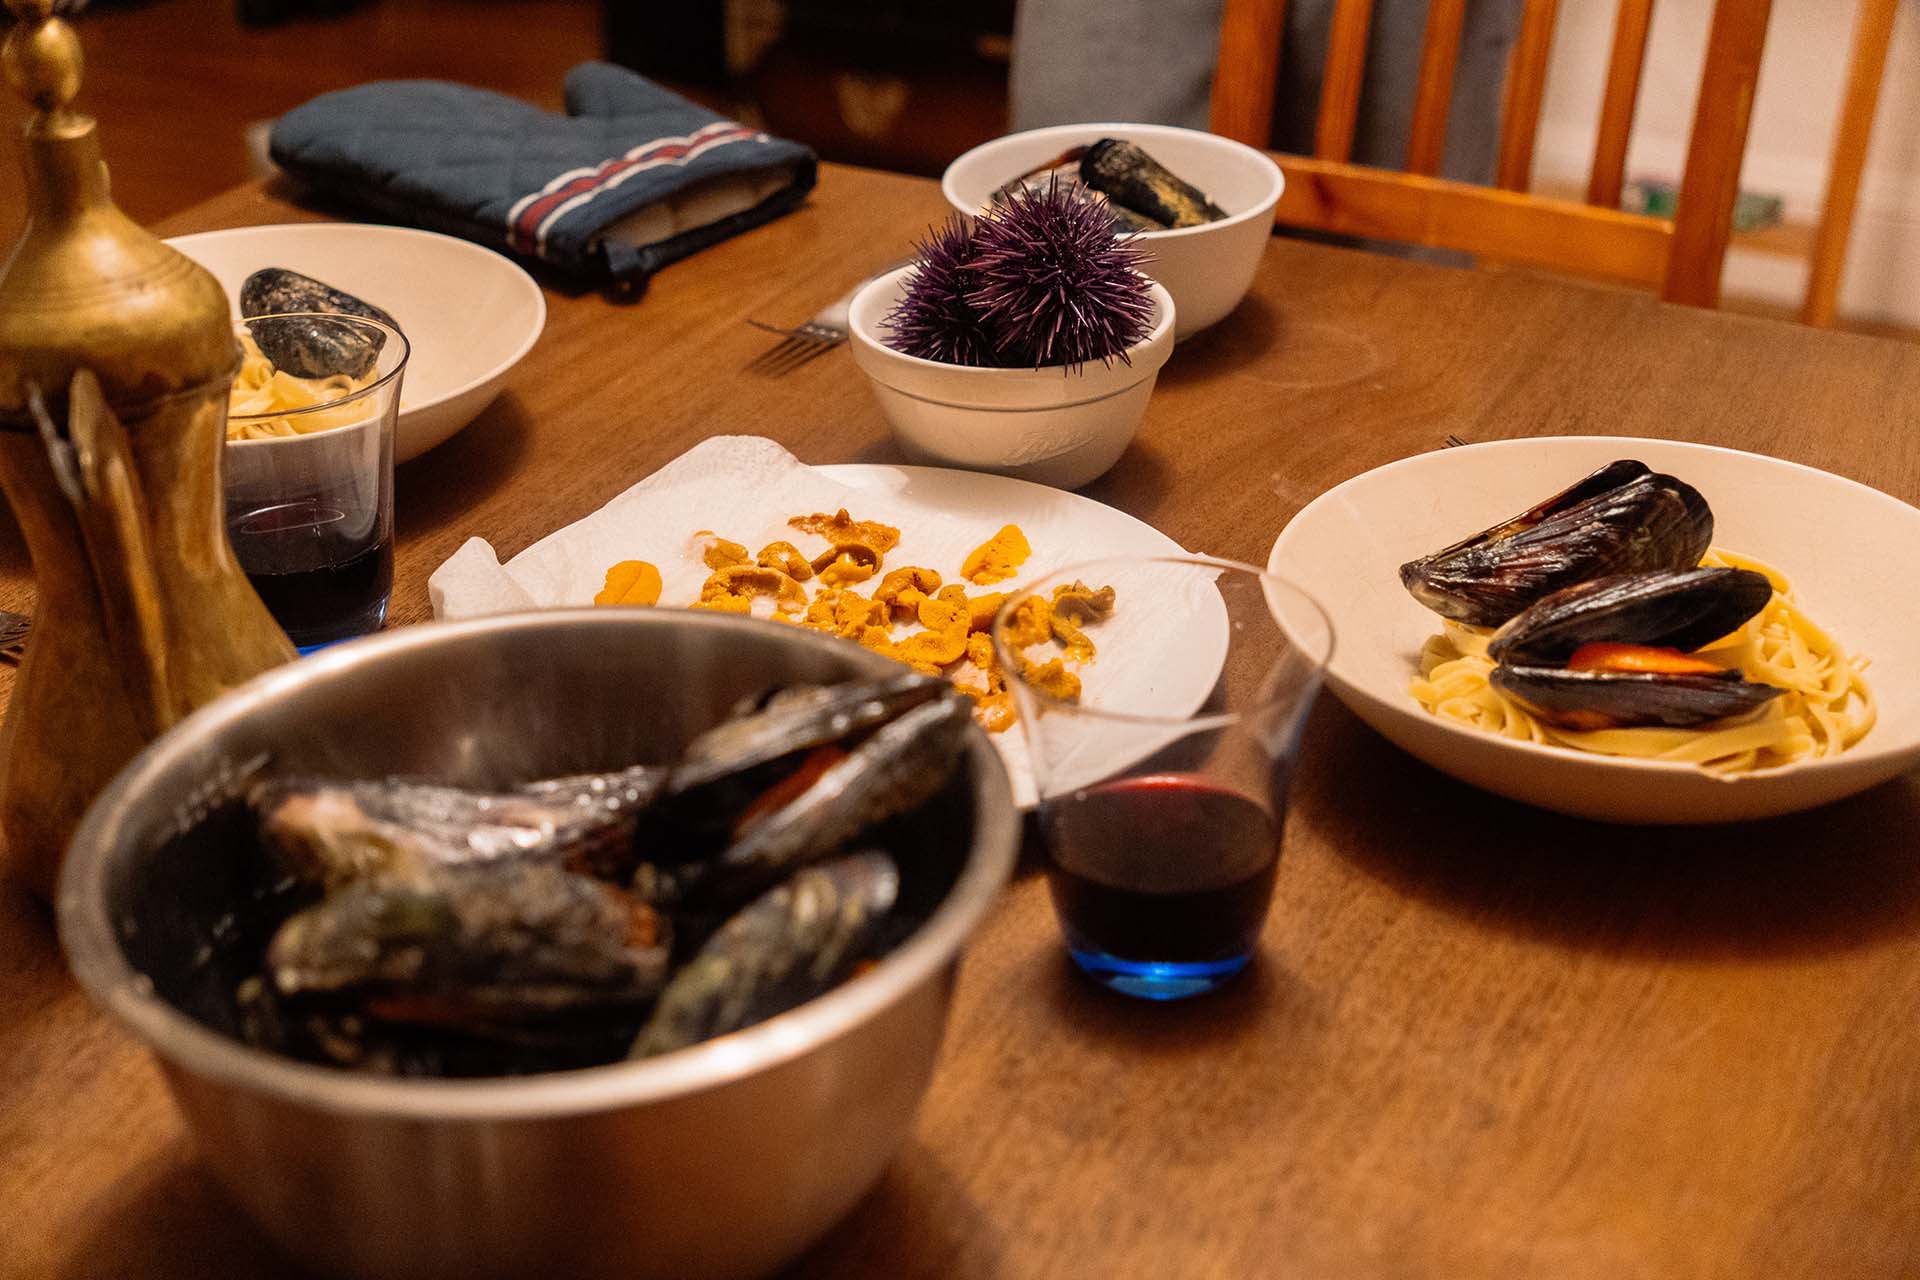 Plates of pasta, mussels and fresh uni laid out on a dining table with glasses of red wine.